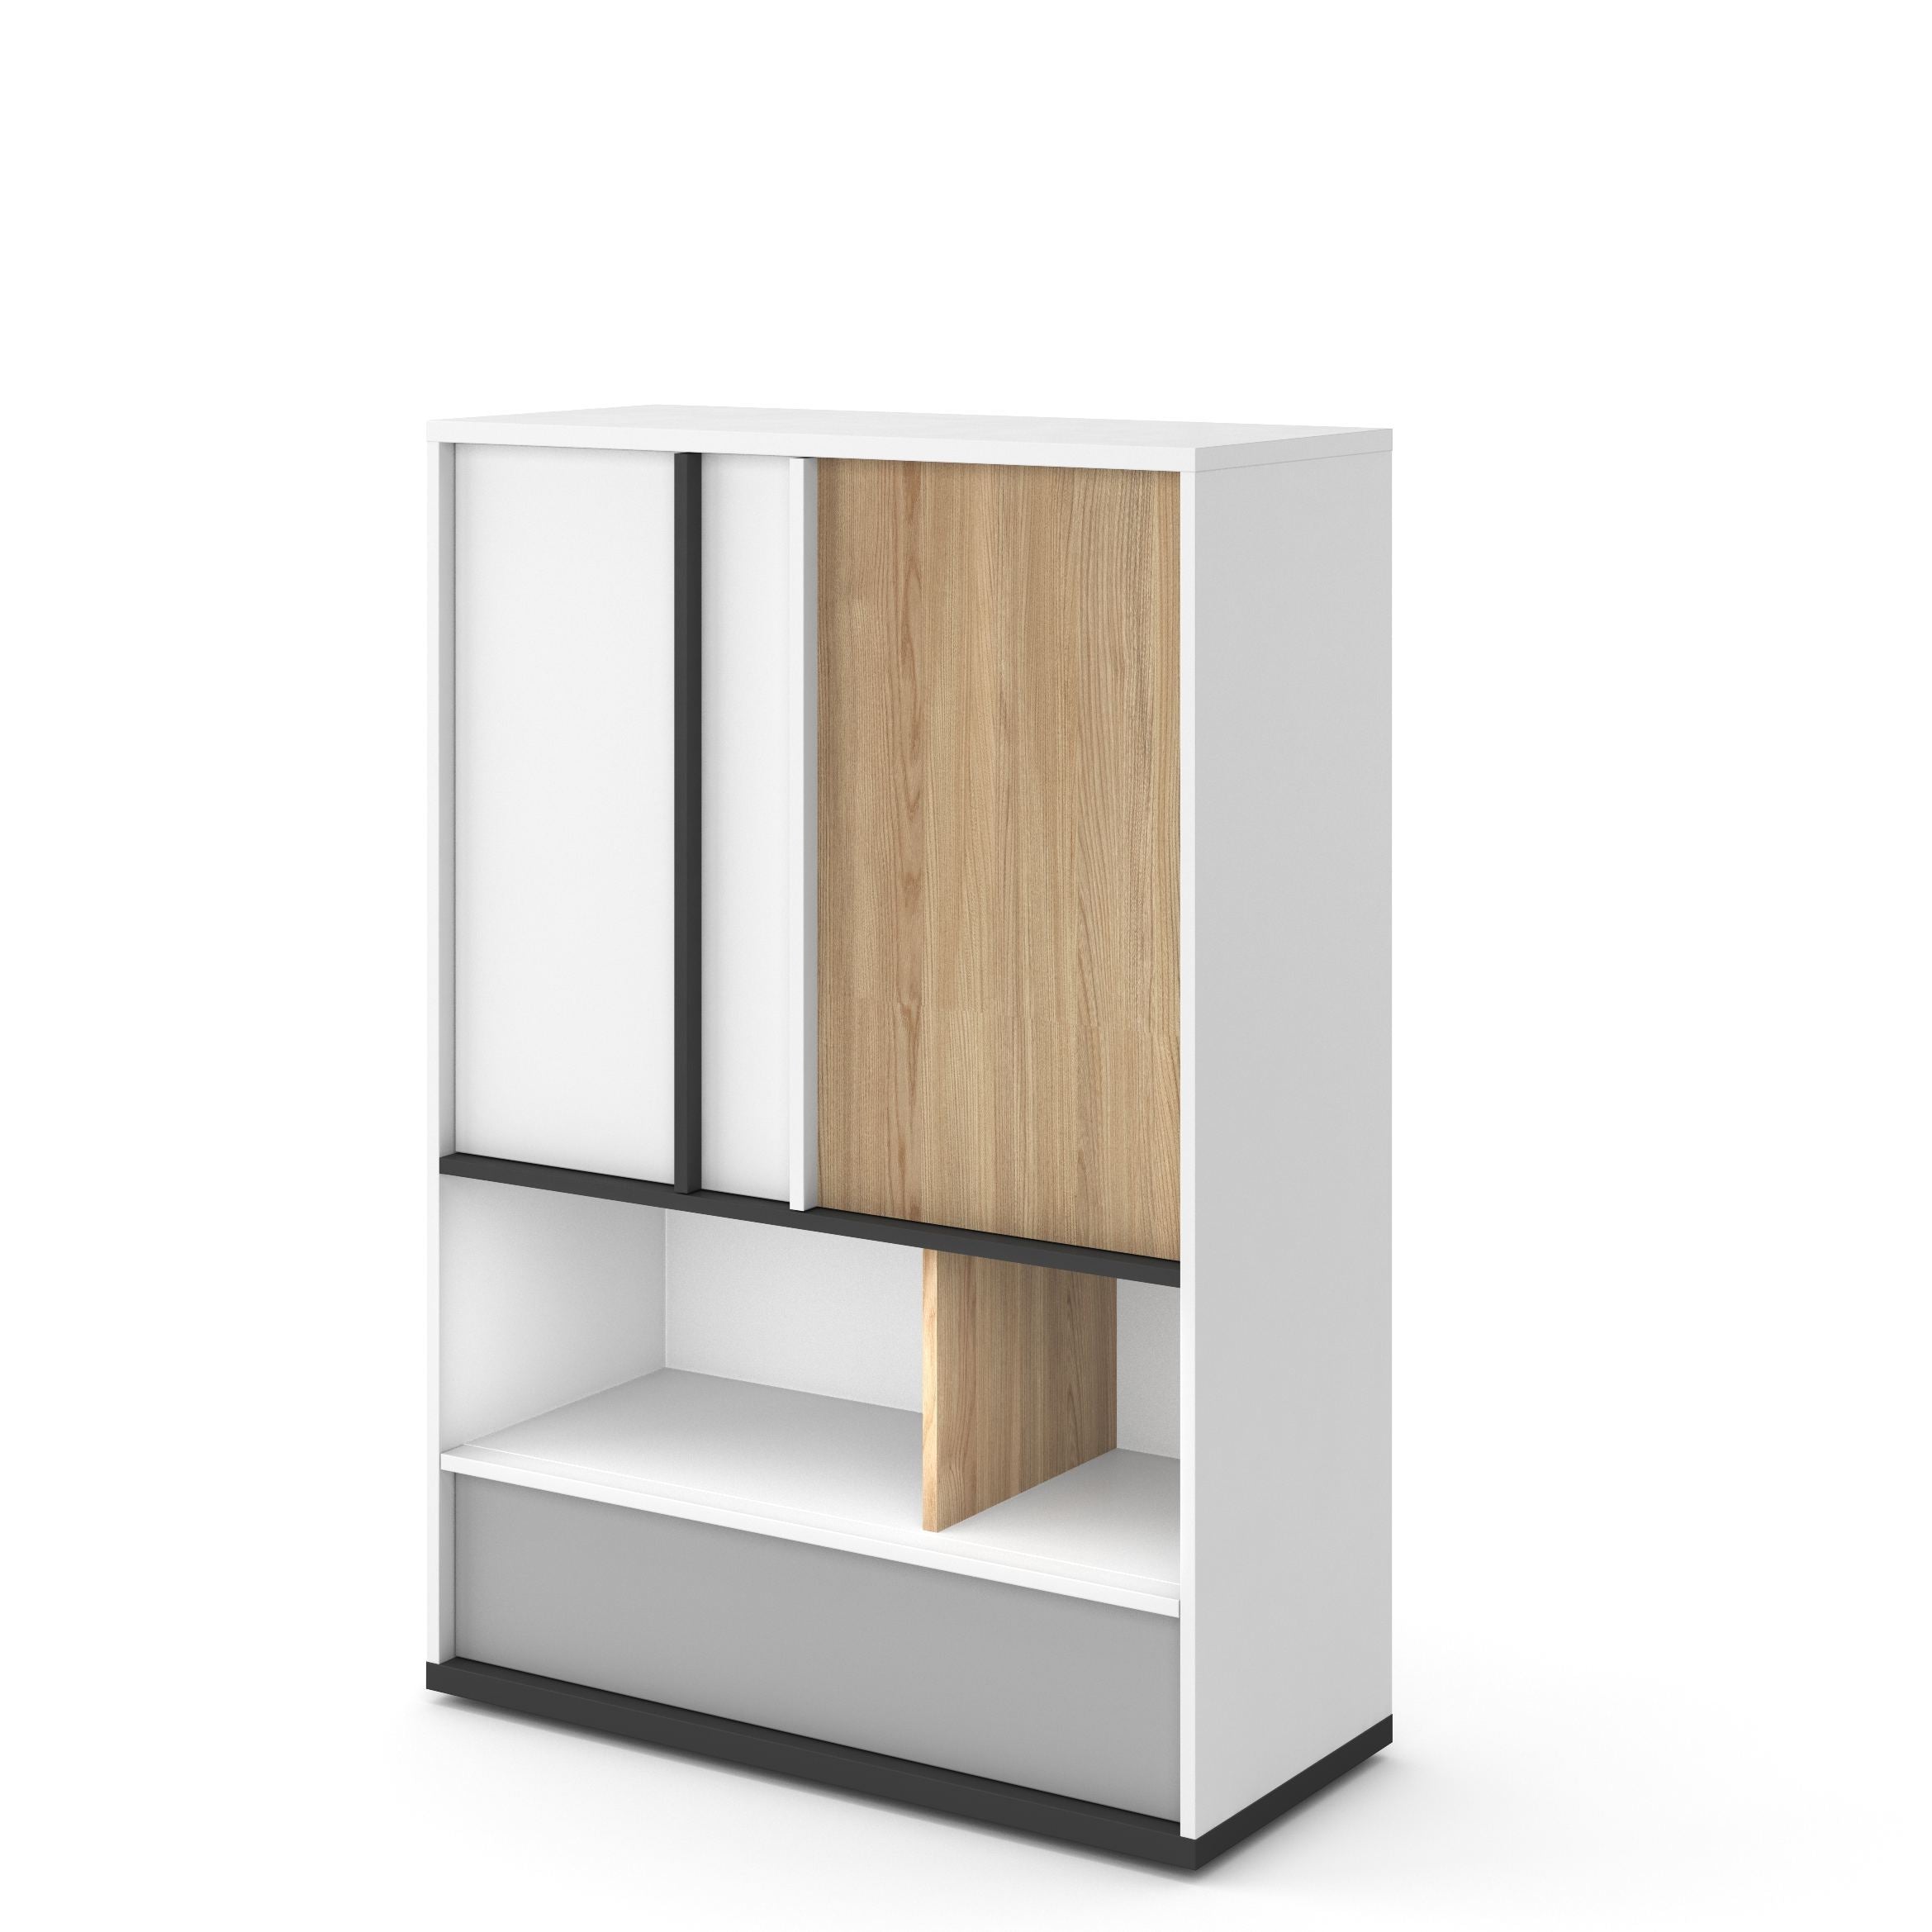 View Imola IM05 Sideboard Cabinet information